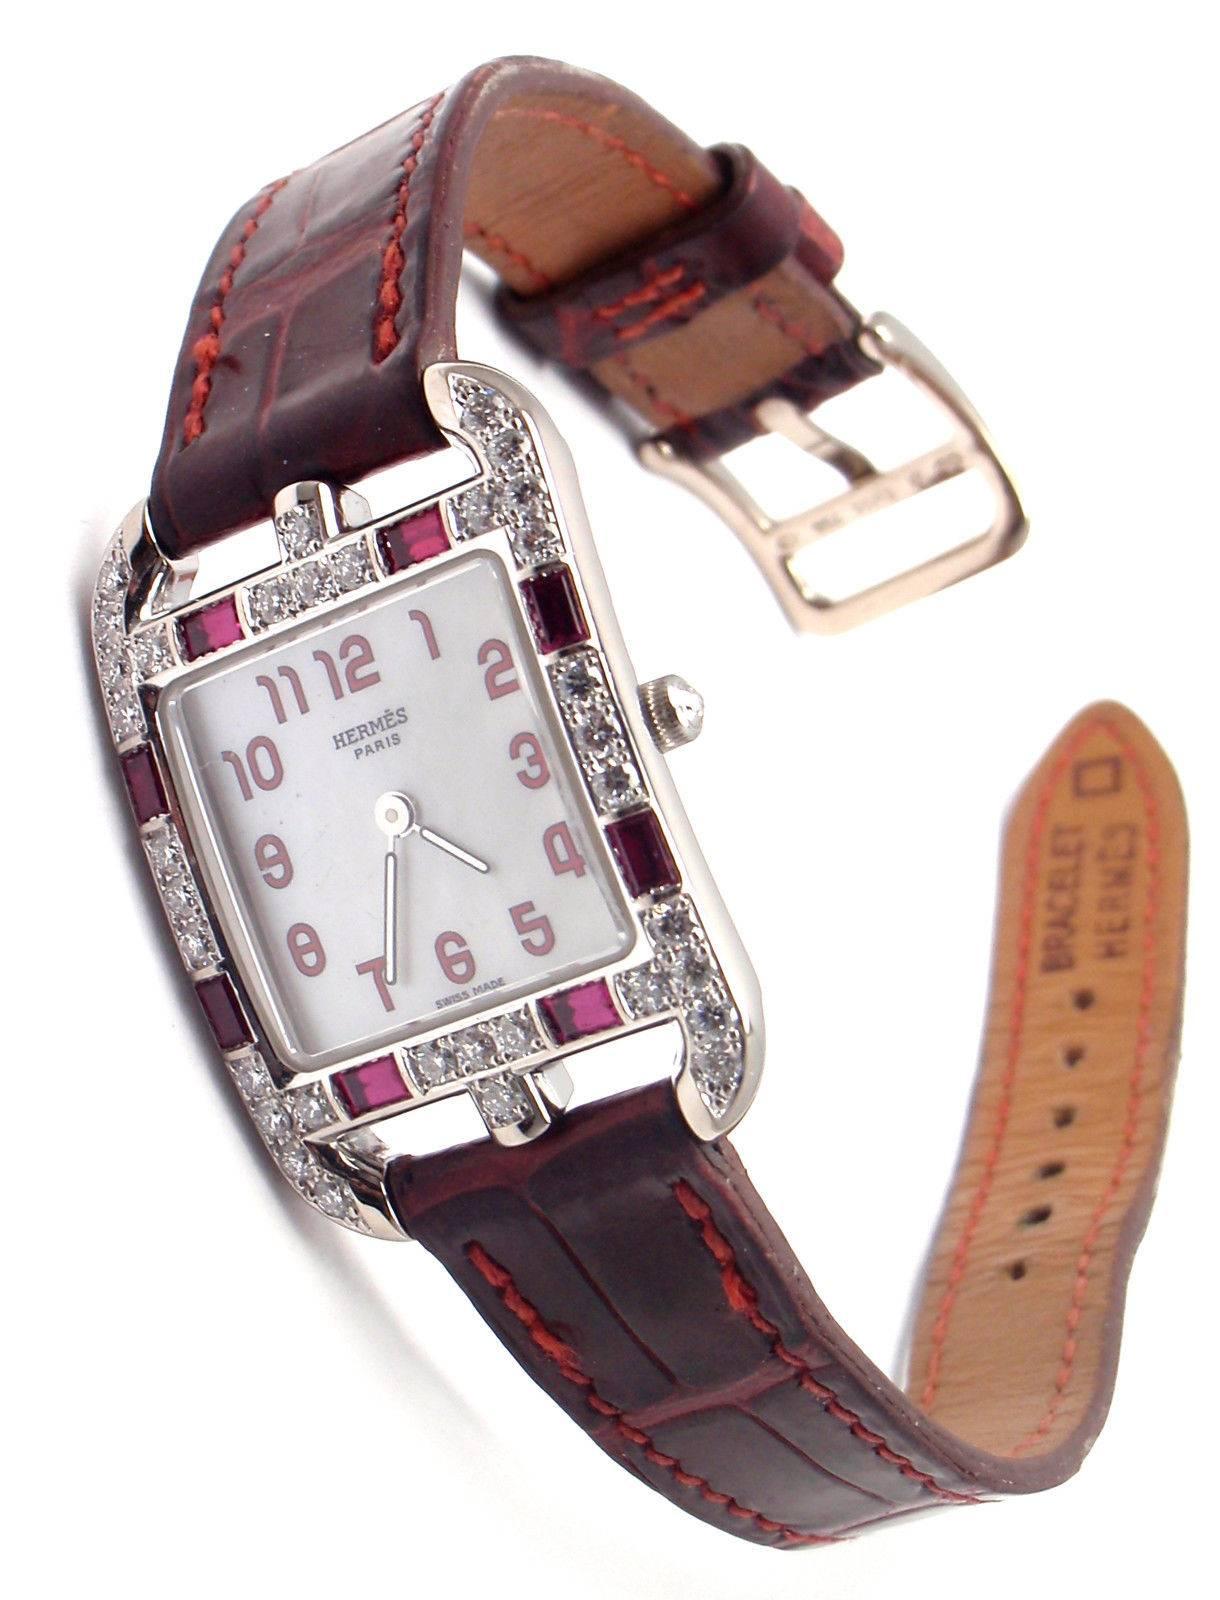 18k white gold diamond and rubies Cape Cod watch by Hermes. 
With round brilliant cut diamonds and rubies on the case.
Watch is in excellent with no fading, scratching, or rubbing.

Details: 
Case Dimensions:  23mm x 34mm x 7mm
Movement: